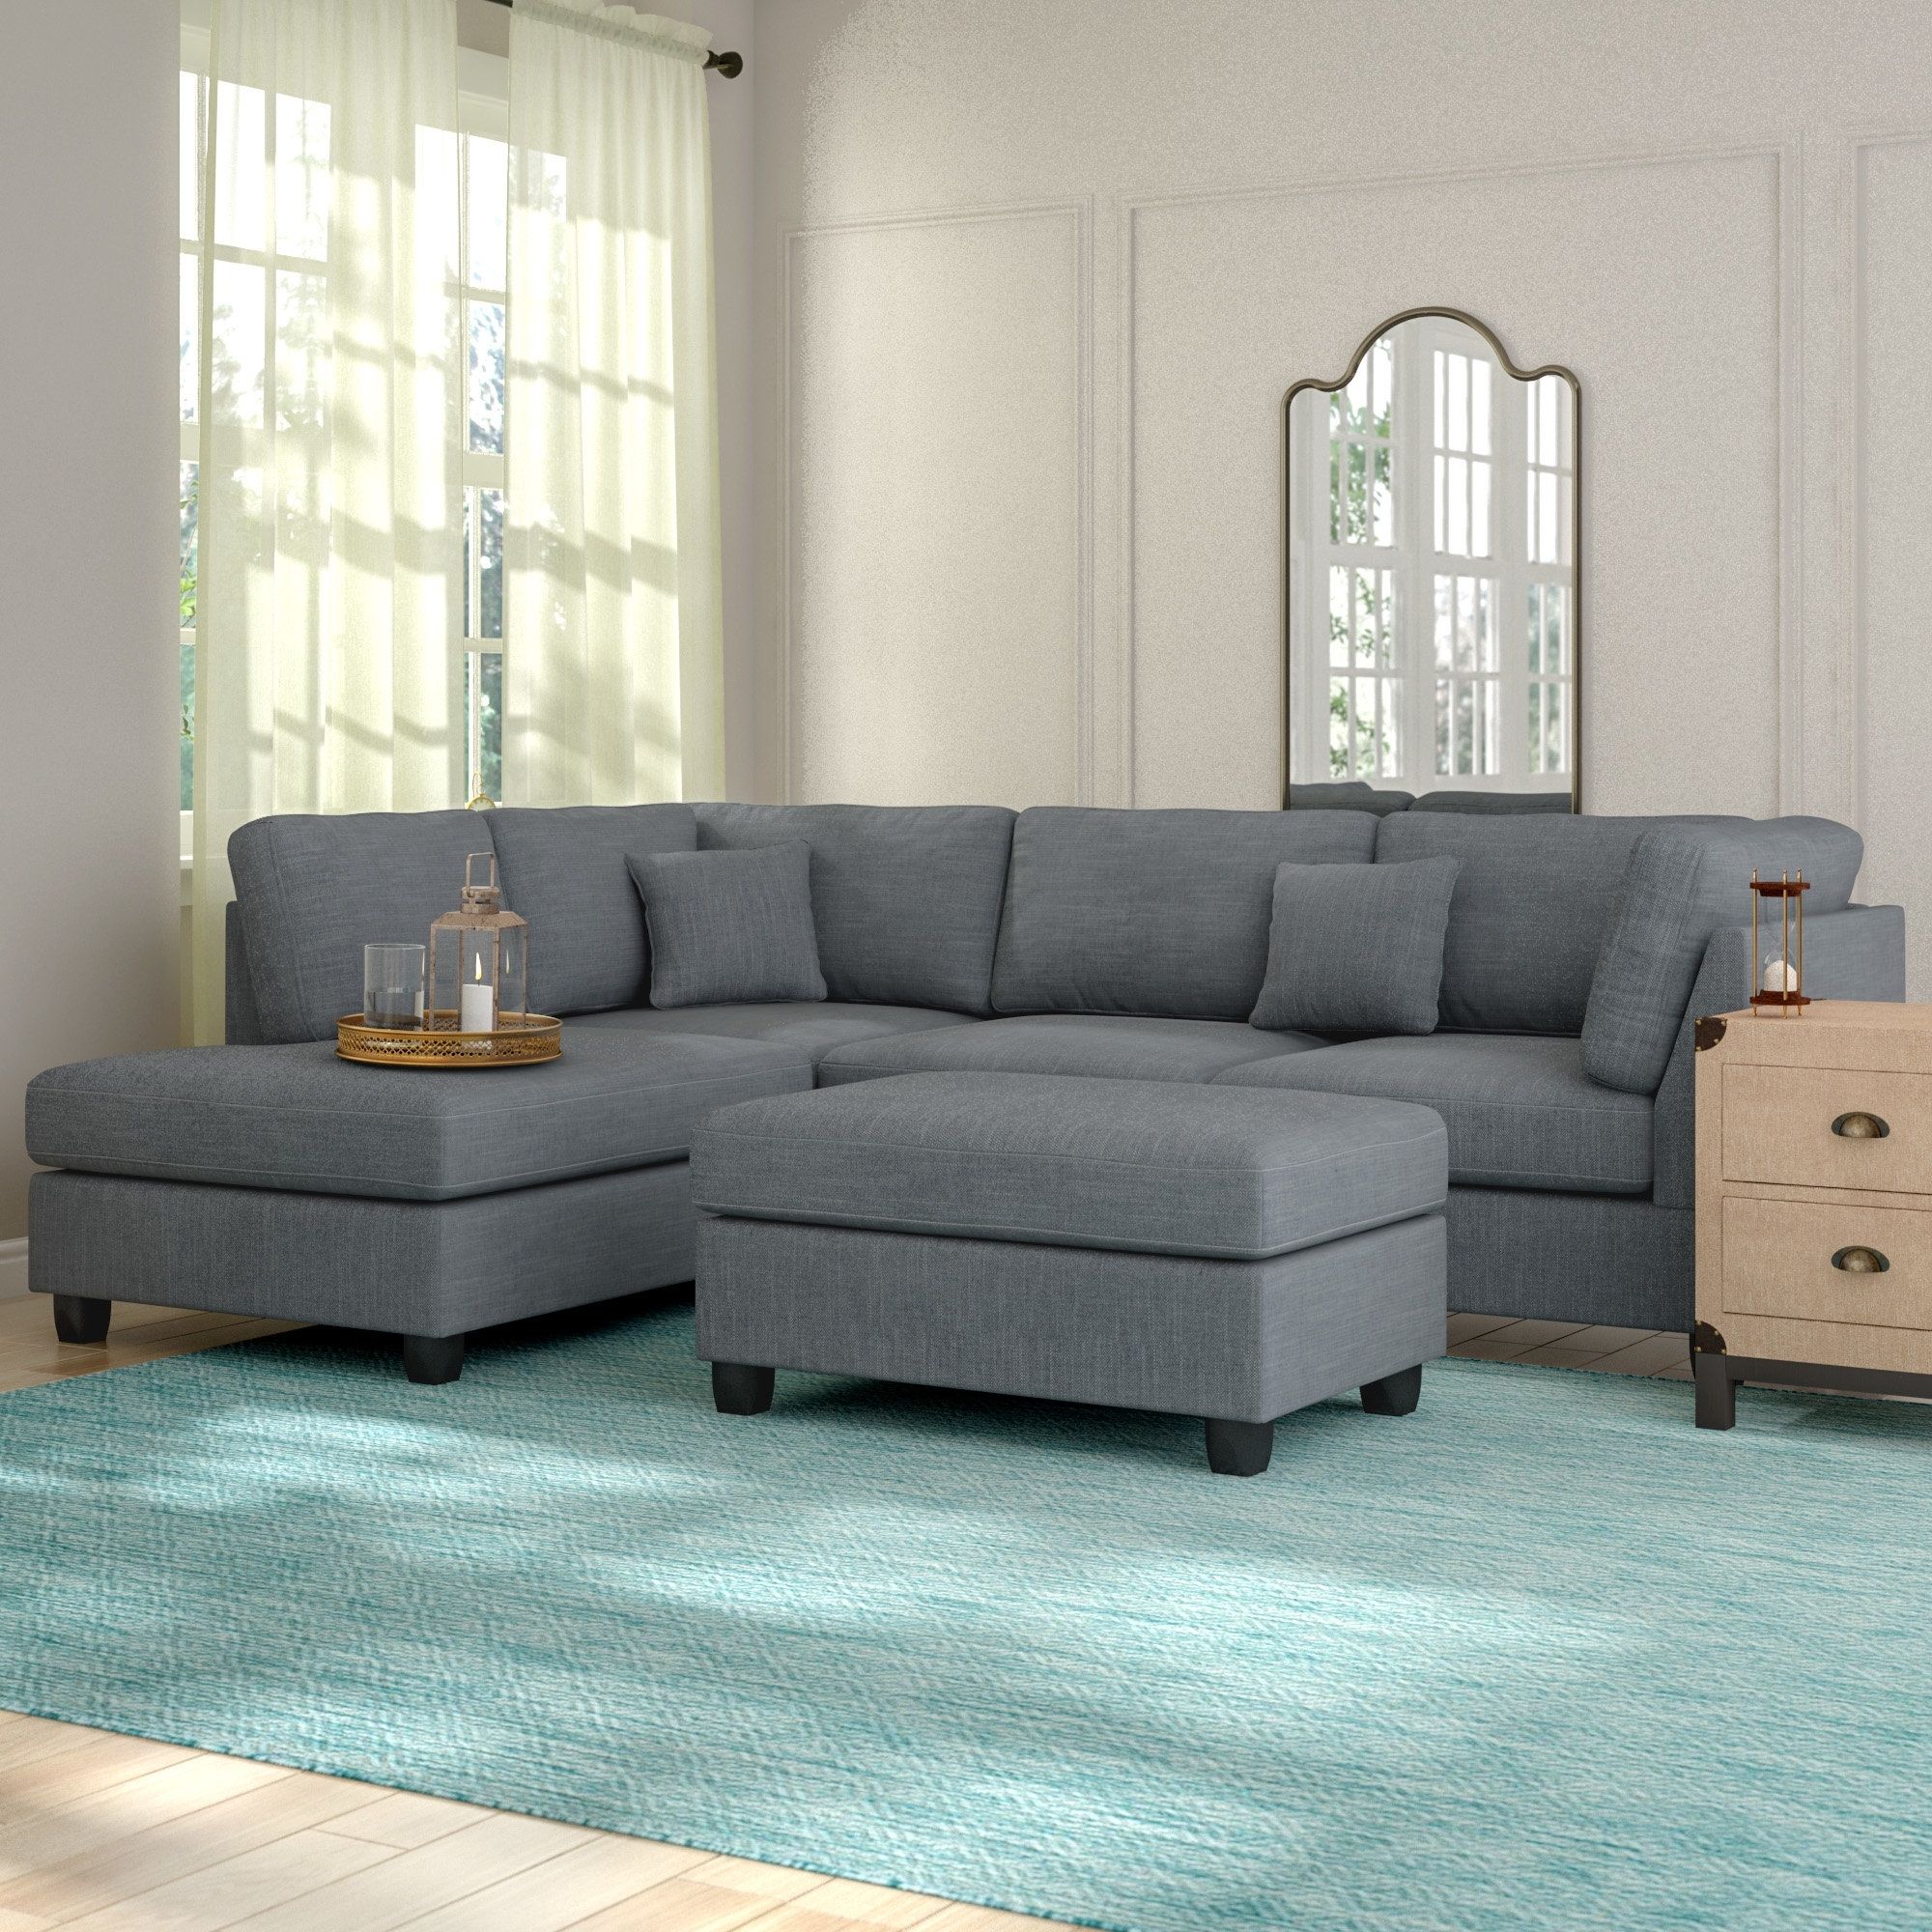 Grey Sectionals You'll Love | Wayfair Inside Norfolk Grey 3 Piece Sectionals With Laf Chaise (View 10 of 30)